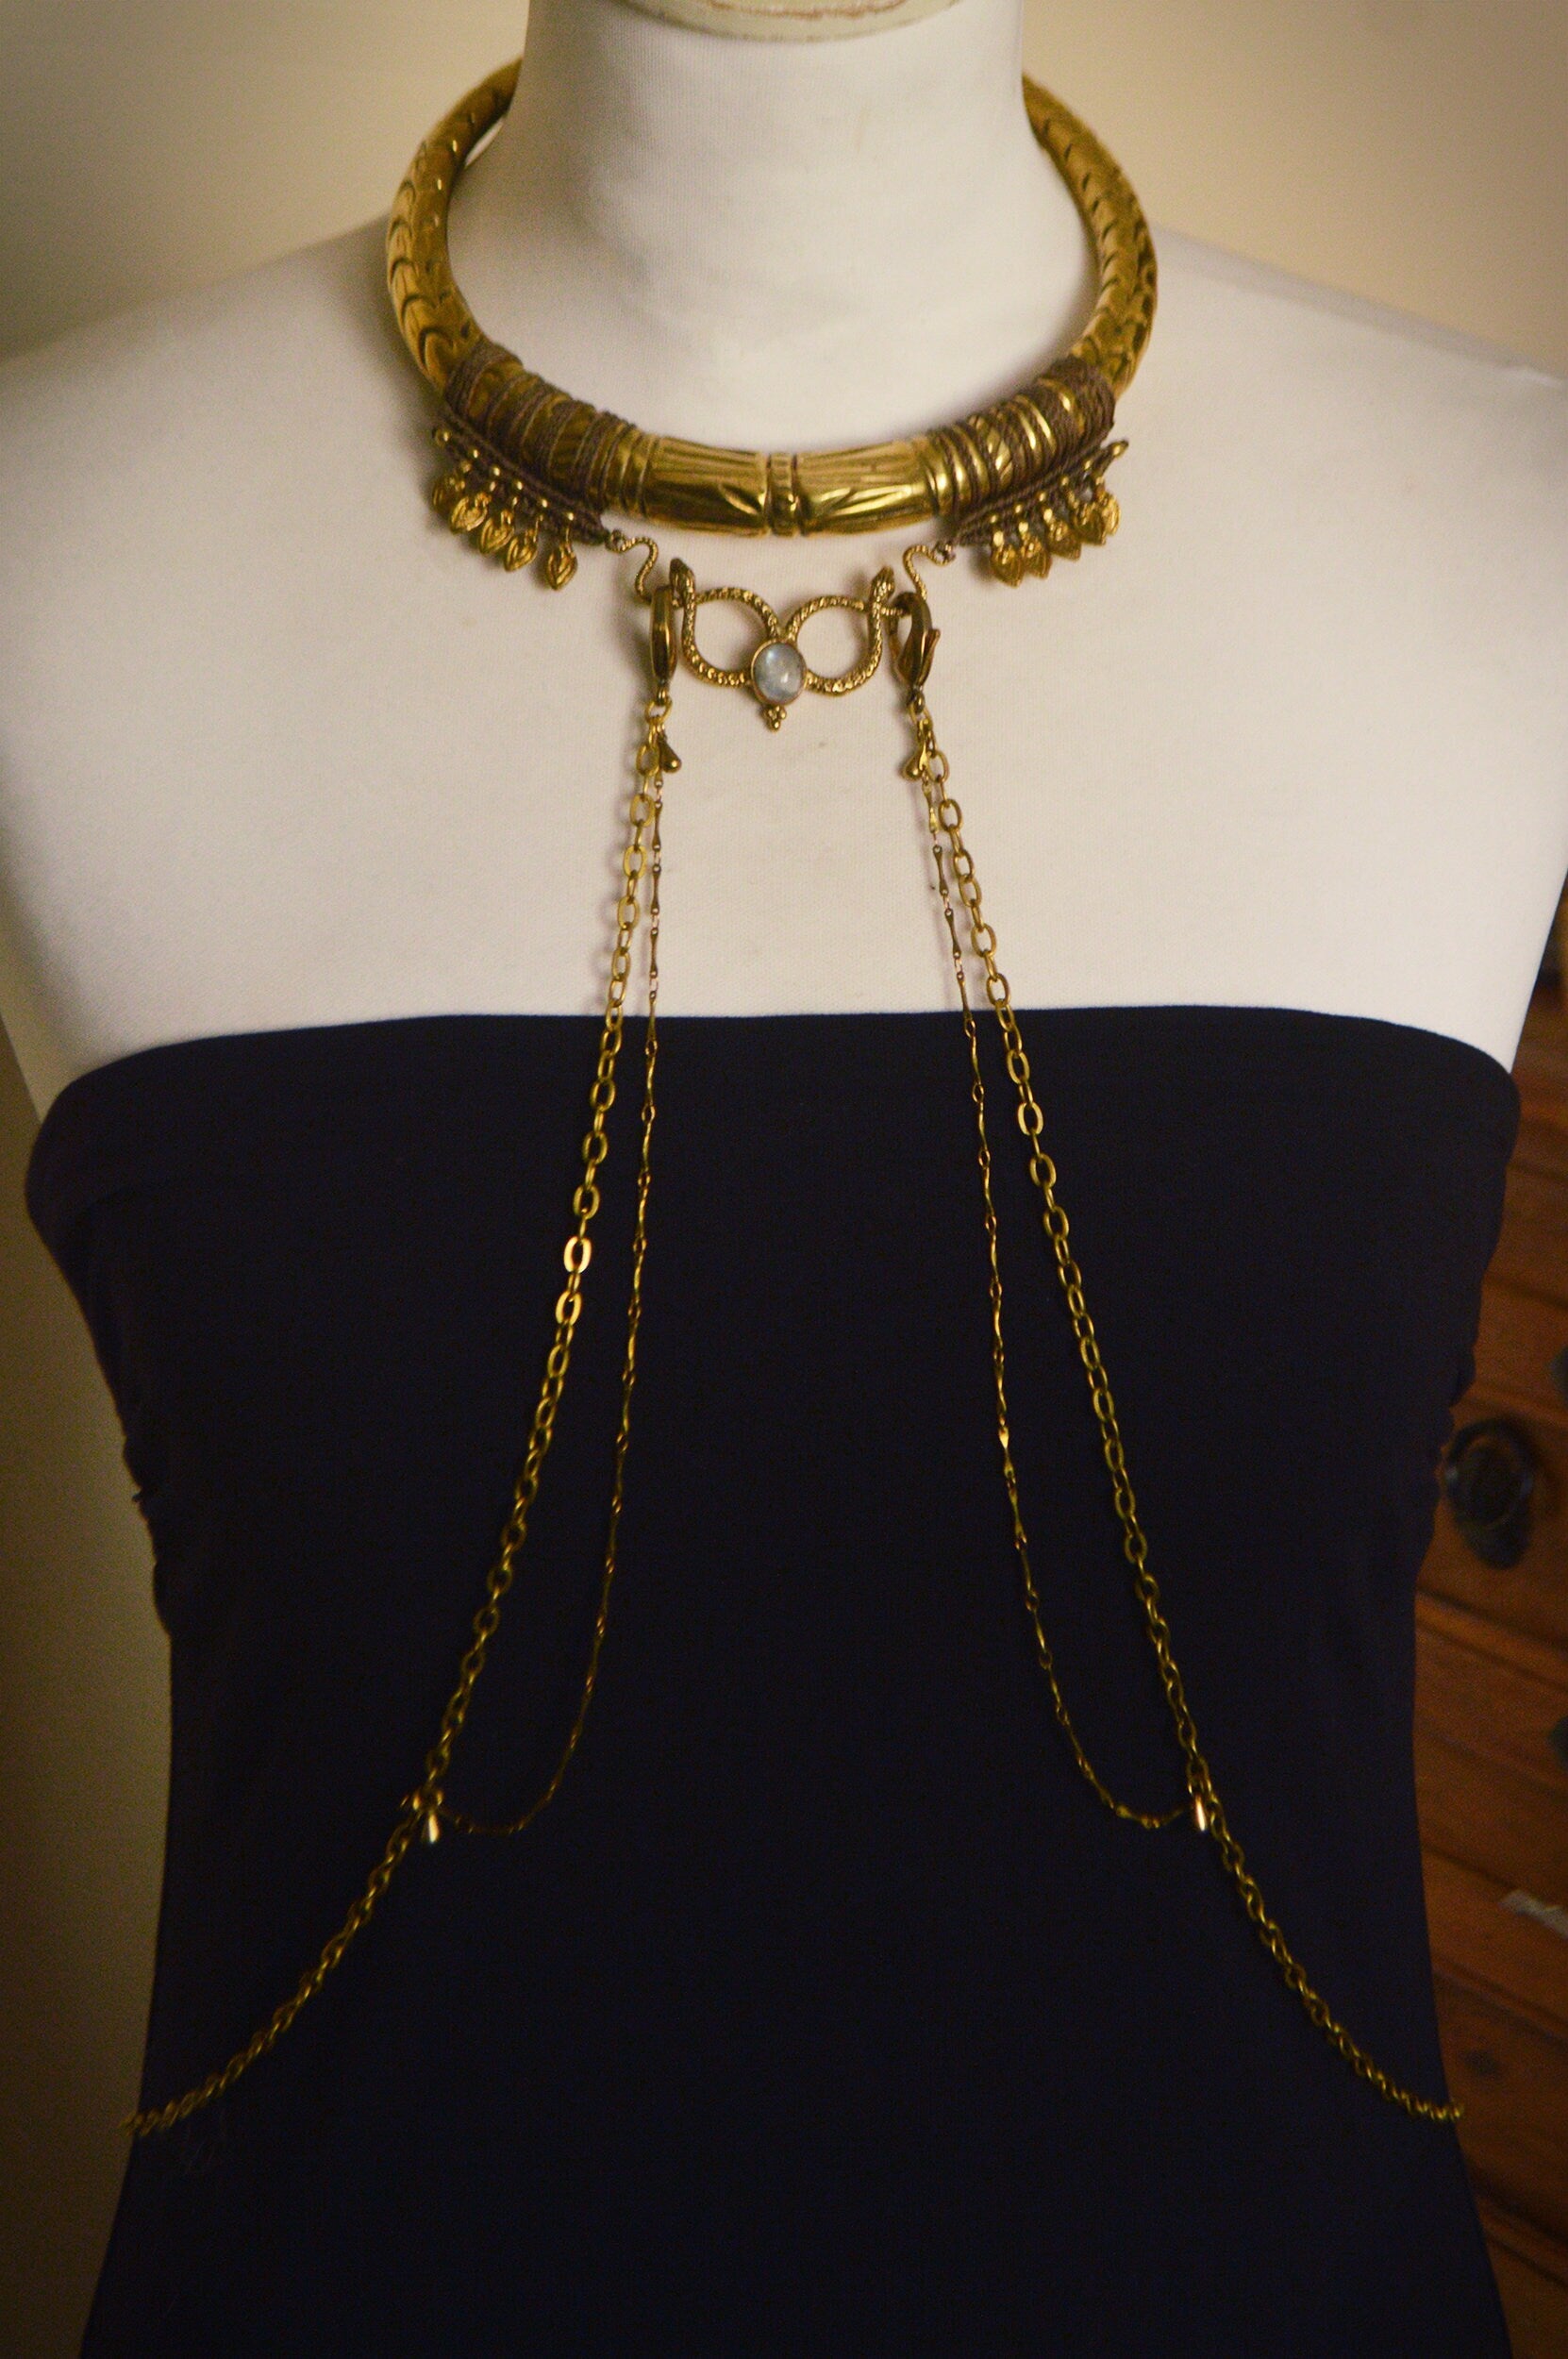 Rainbow moonstone ornamental body harness with brass chains and detachable macrame brass collar